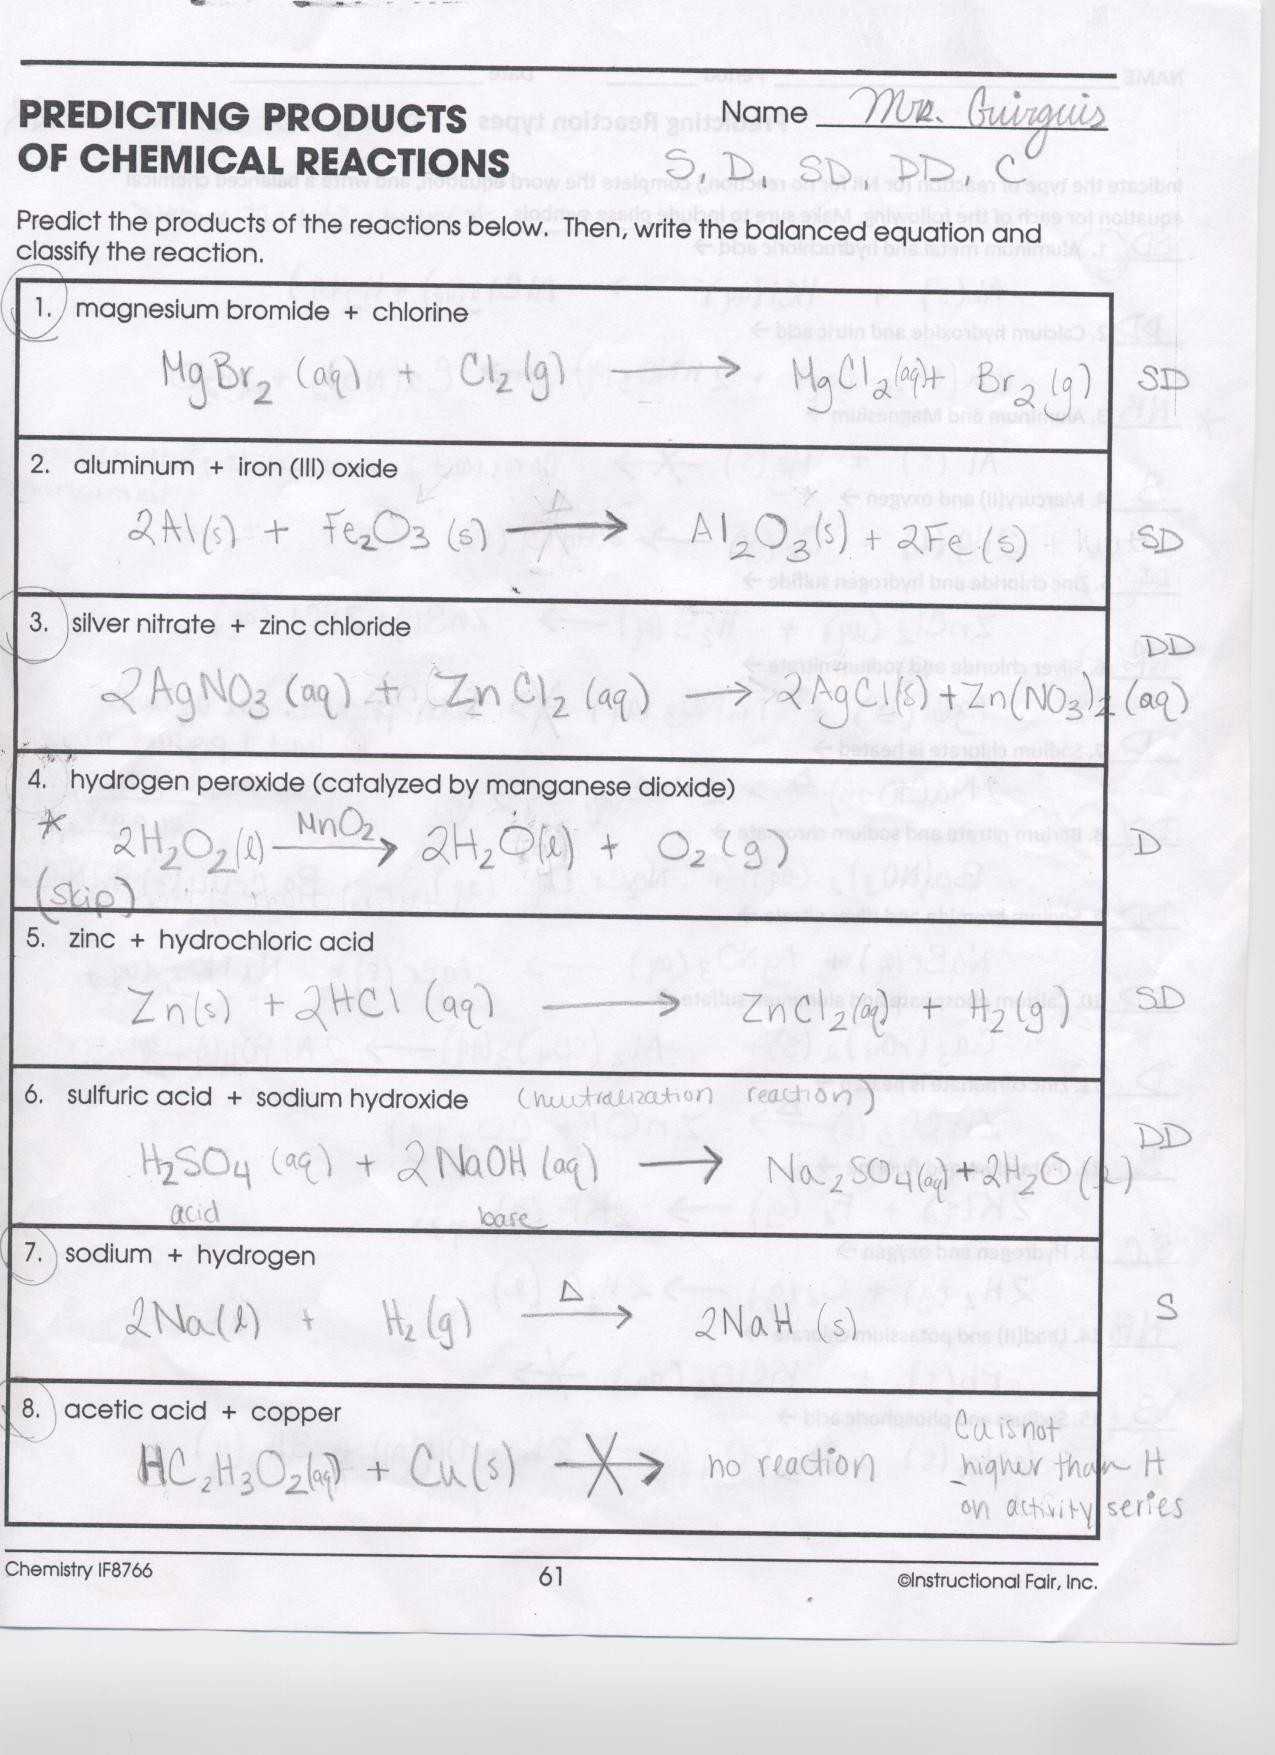 Neutralization Reactions Worksheet Along with Oxidation Reduction Reactions Worksheet Gallery Worksheet for Kids